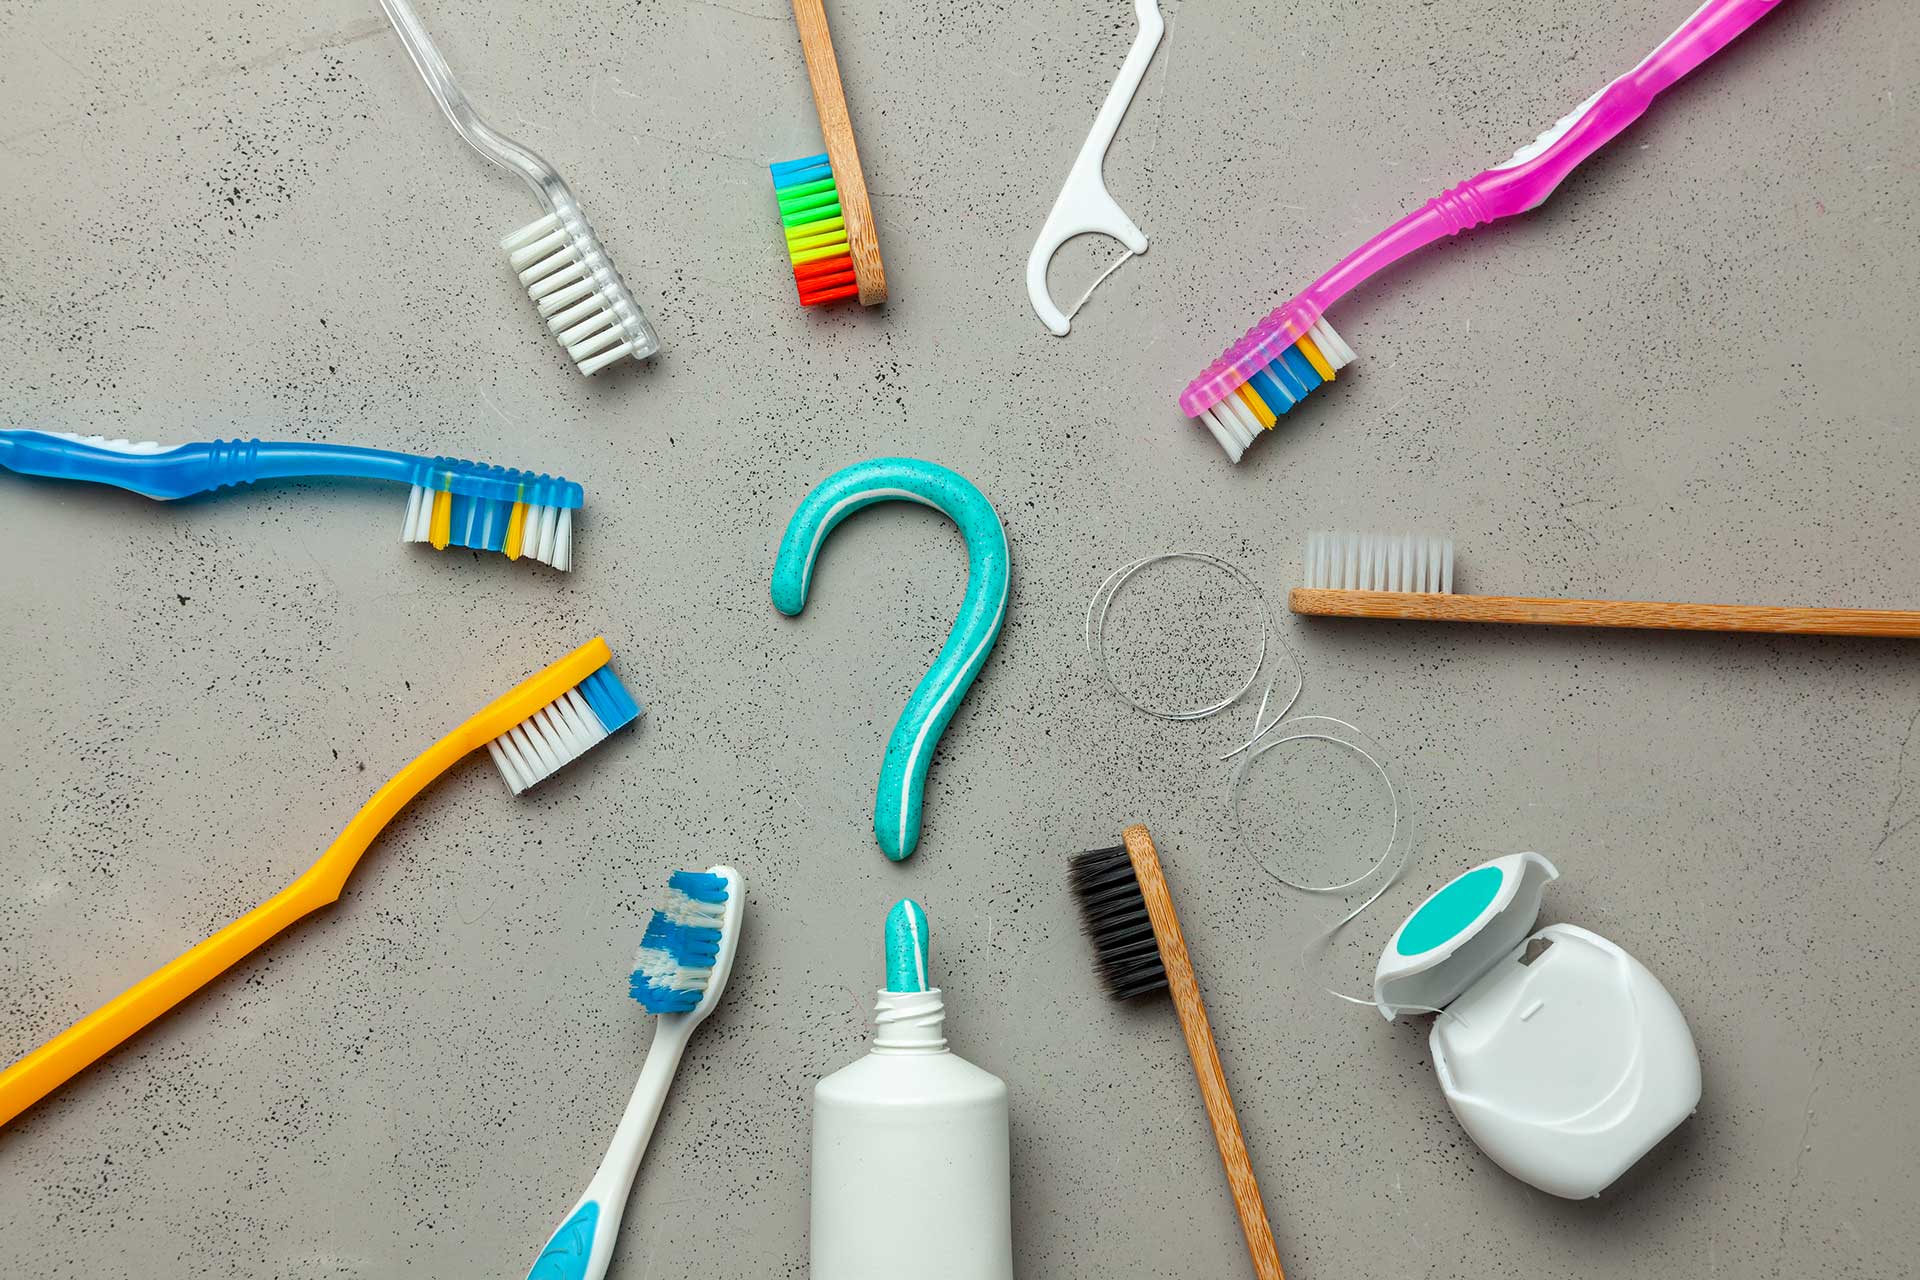 Basic Steps to Maintain Dental Health with the Right Toothbrush